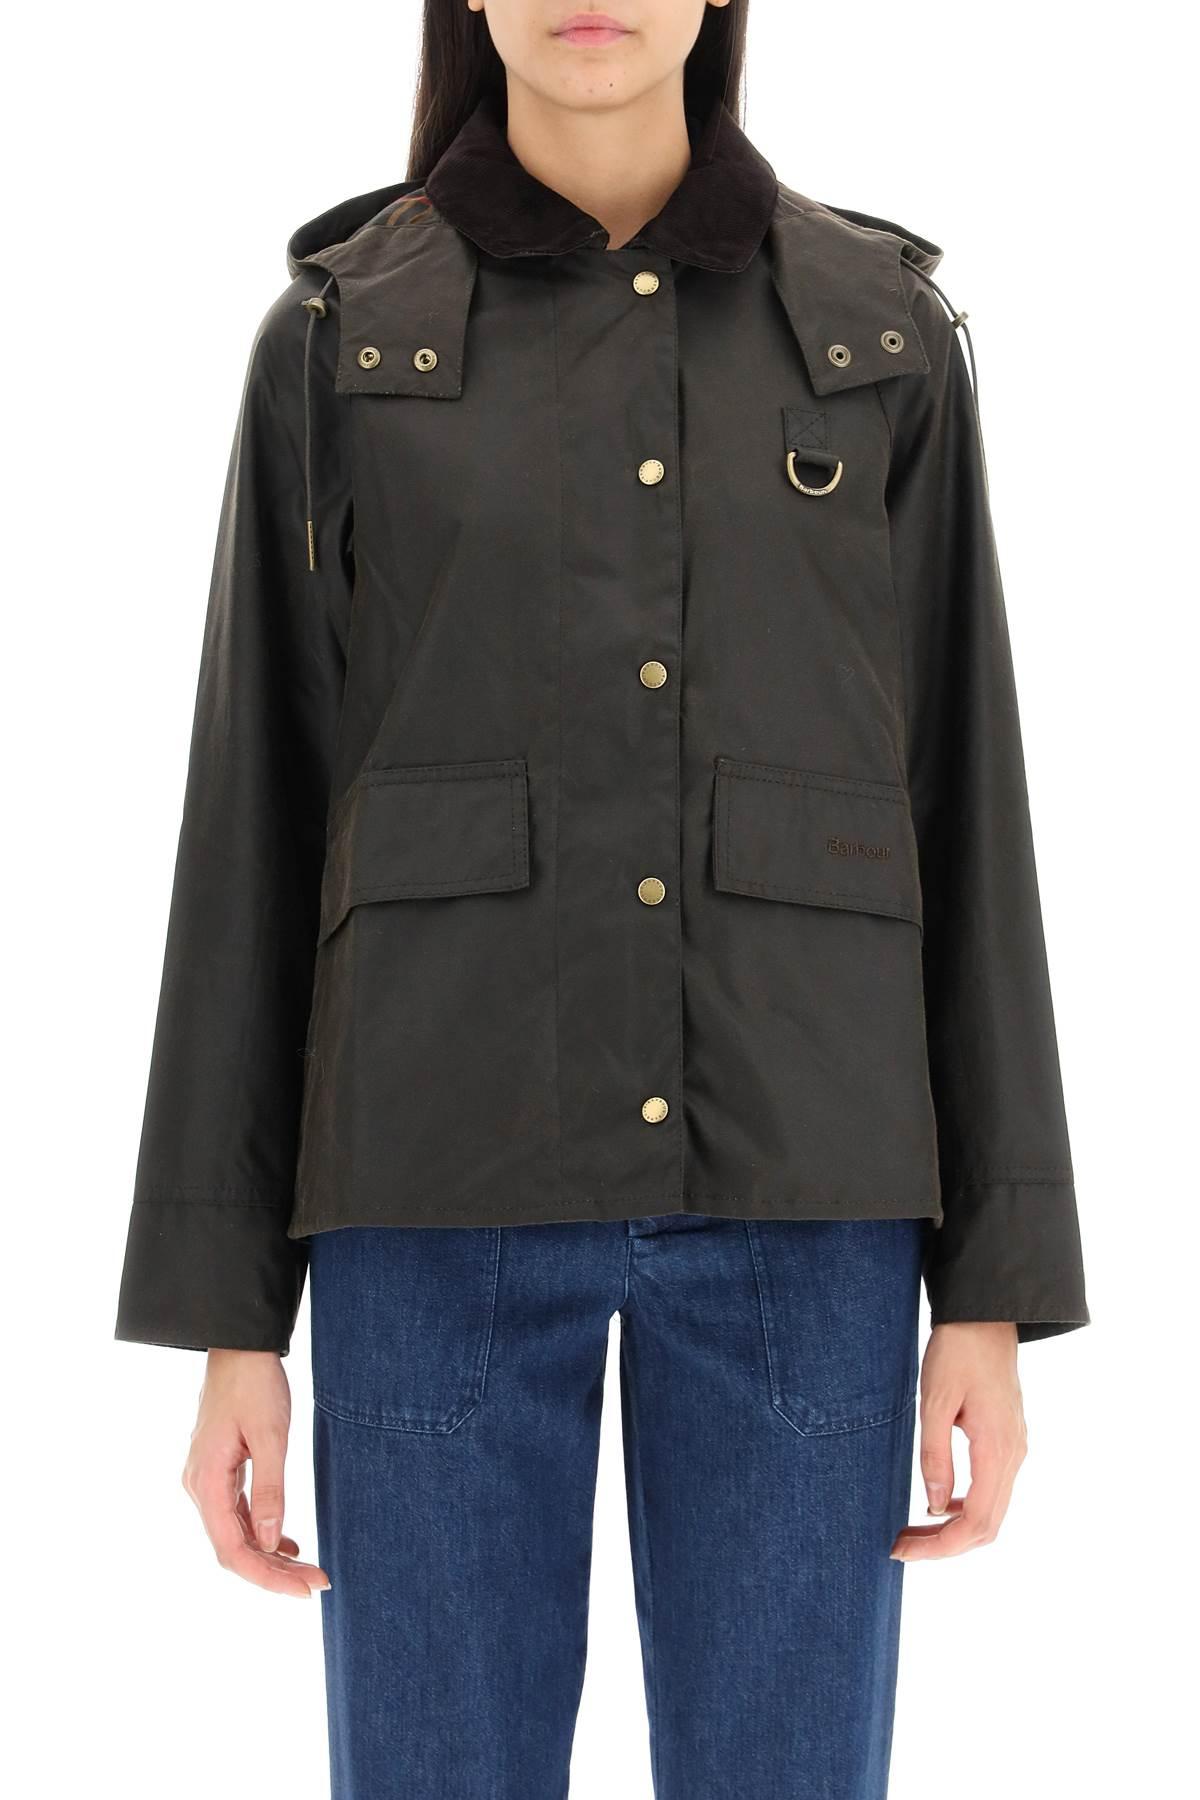 Barbour 'avon Wax' Waxed Cotton Jacket With Detachable Hood in Black | Lyst  UK